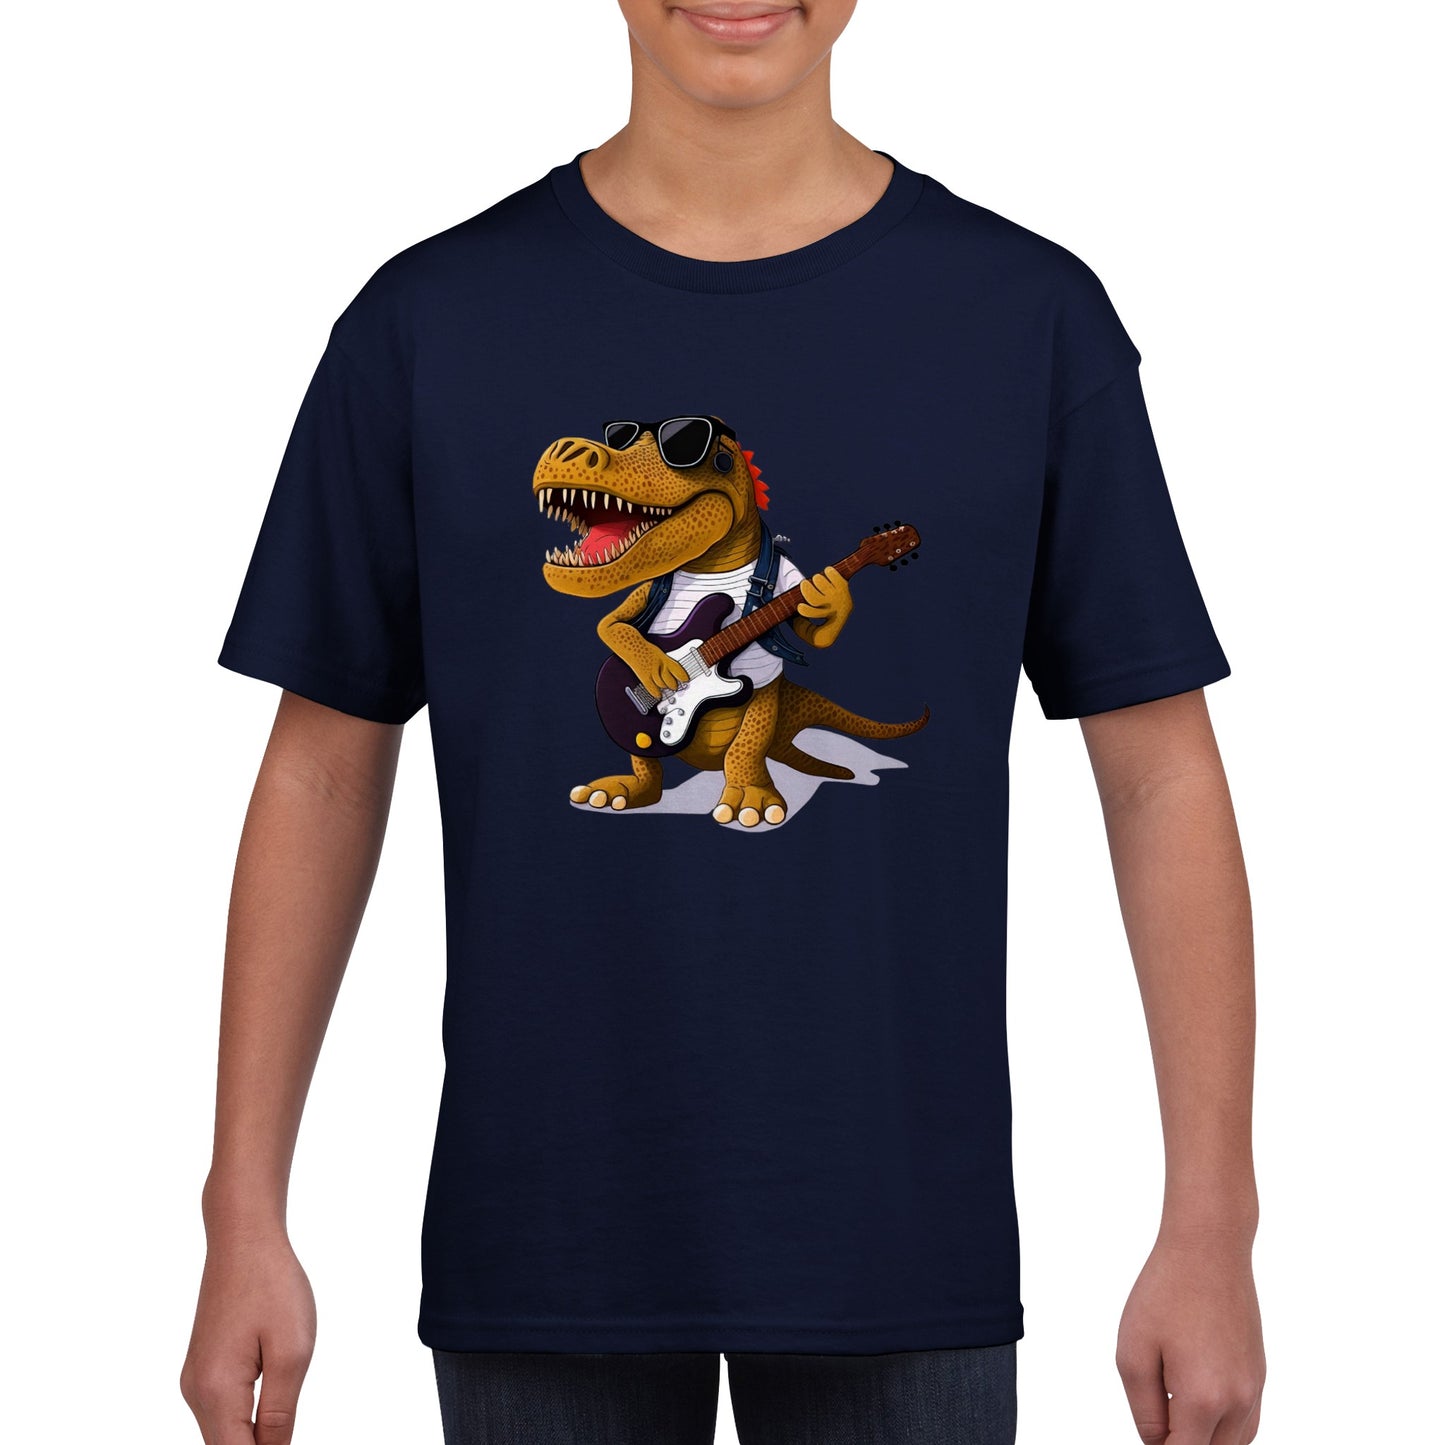 Boy wearing a navy t-shirt with a rockstar dino playing the guitar print